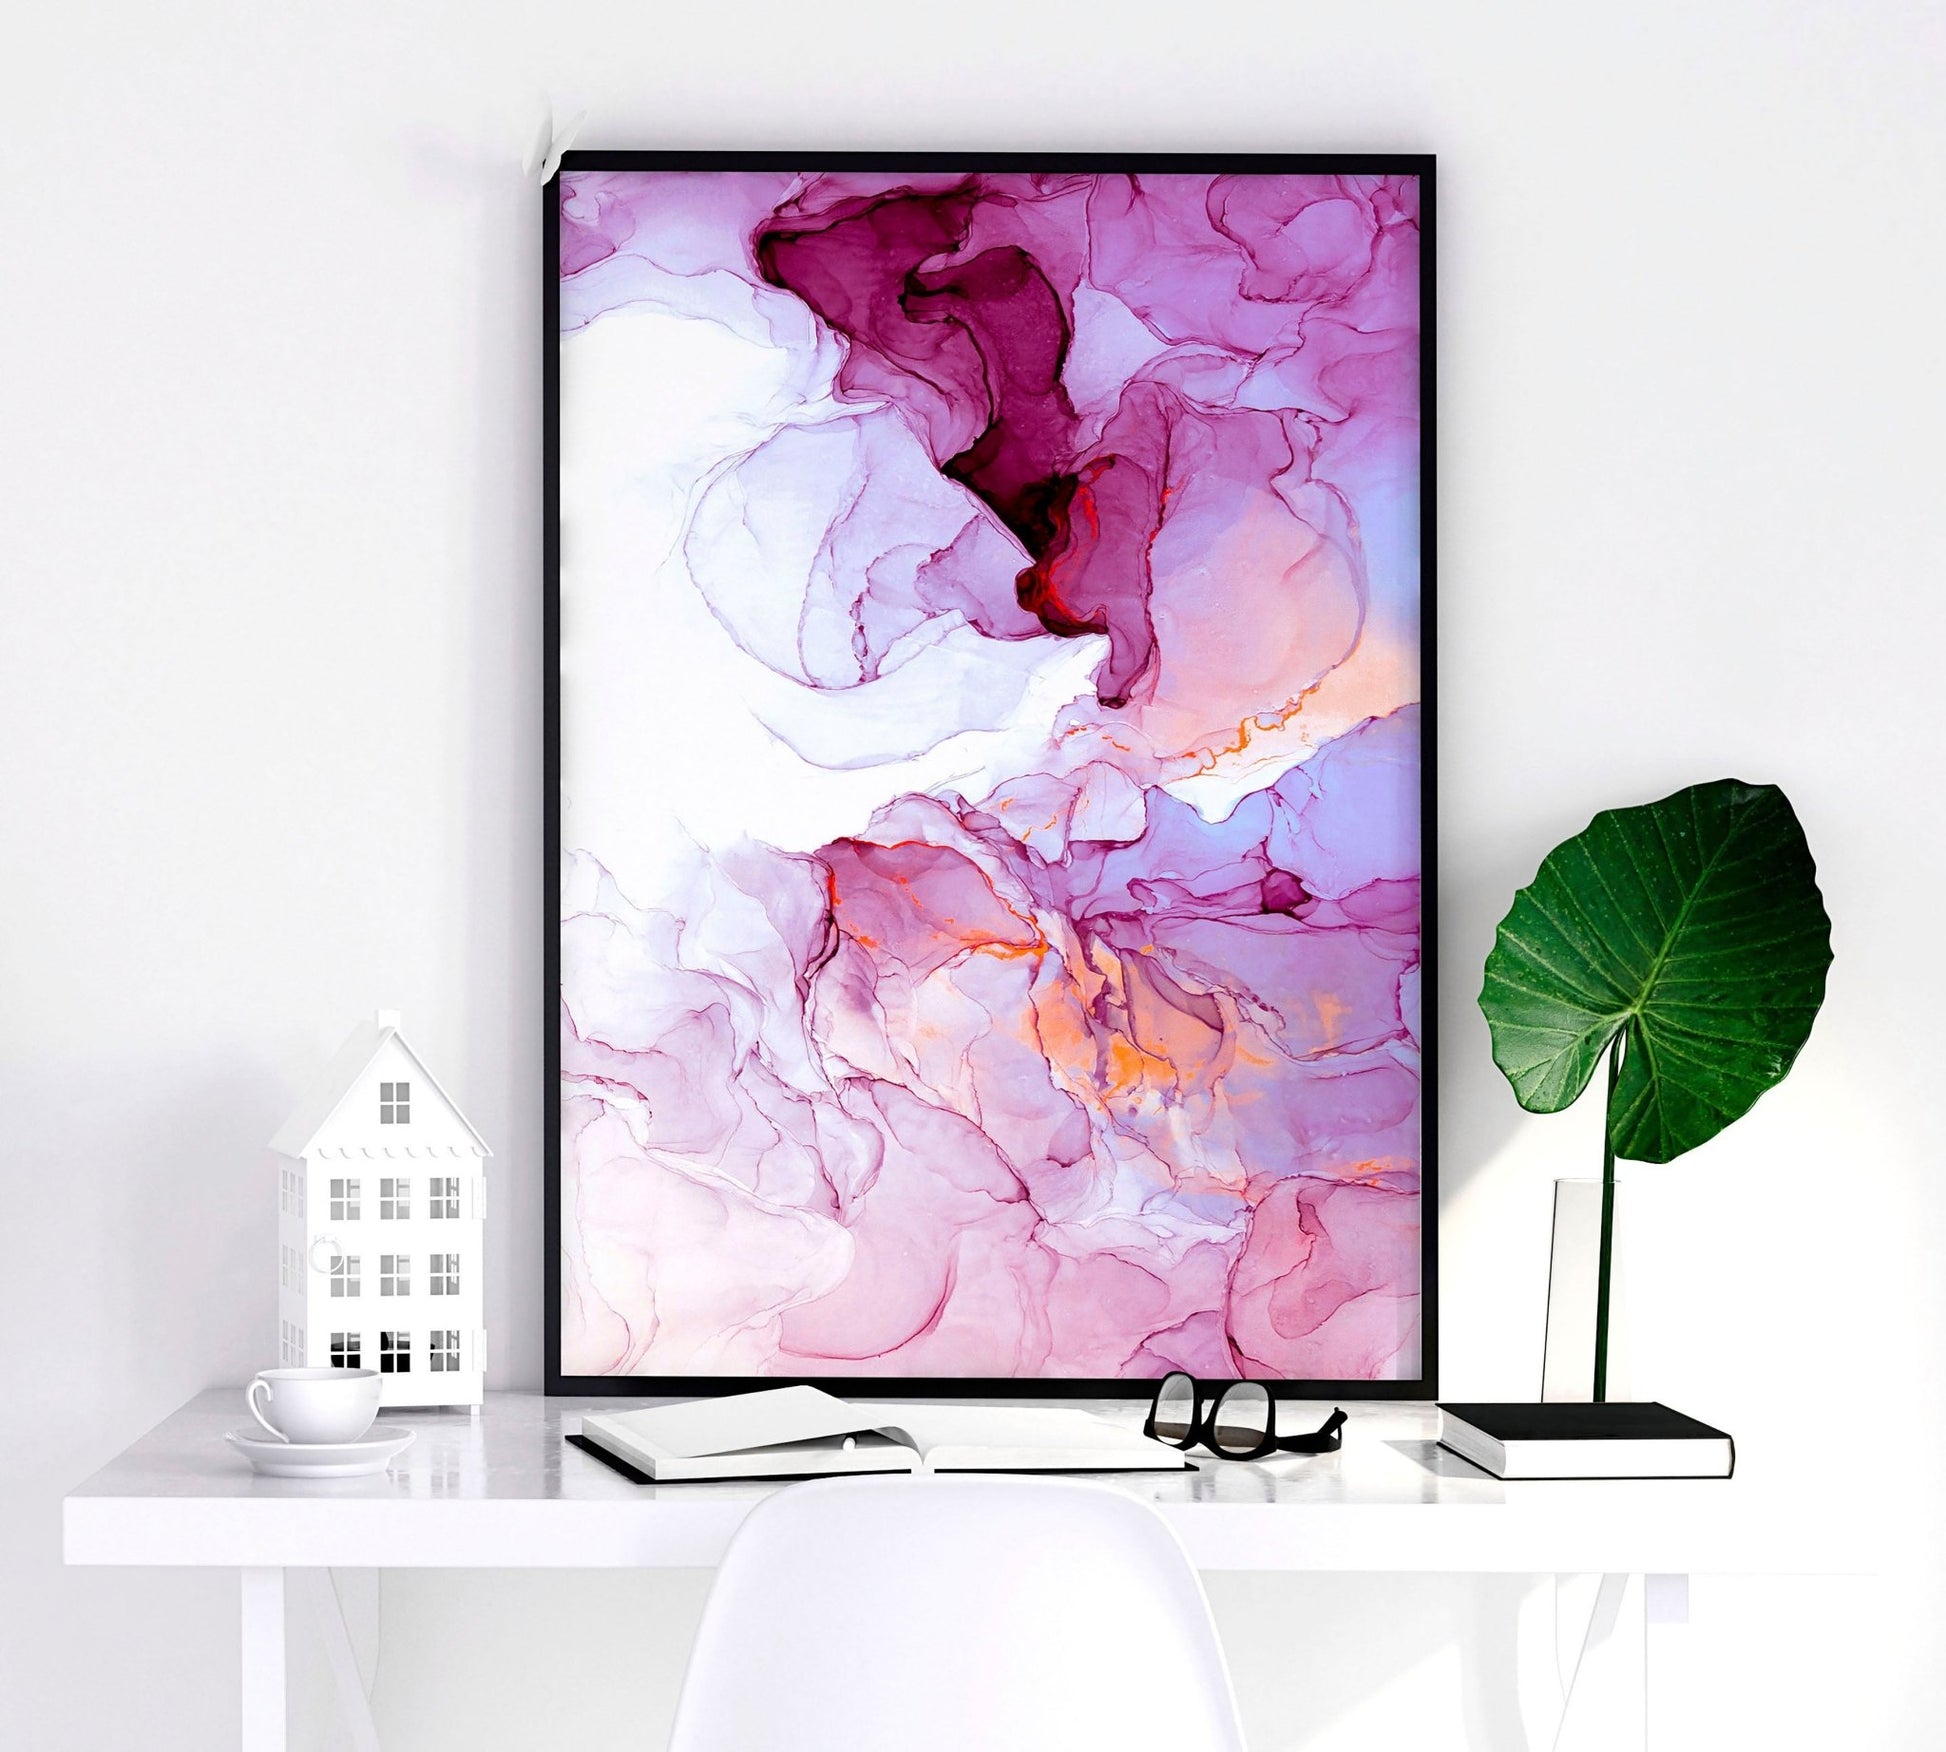 Magenta Abstract wall art for living room | set of 2 wall art prints - About Wall Art